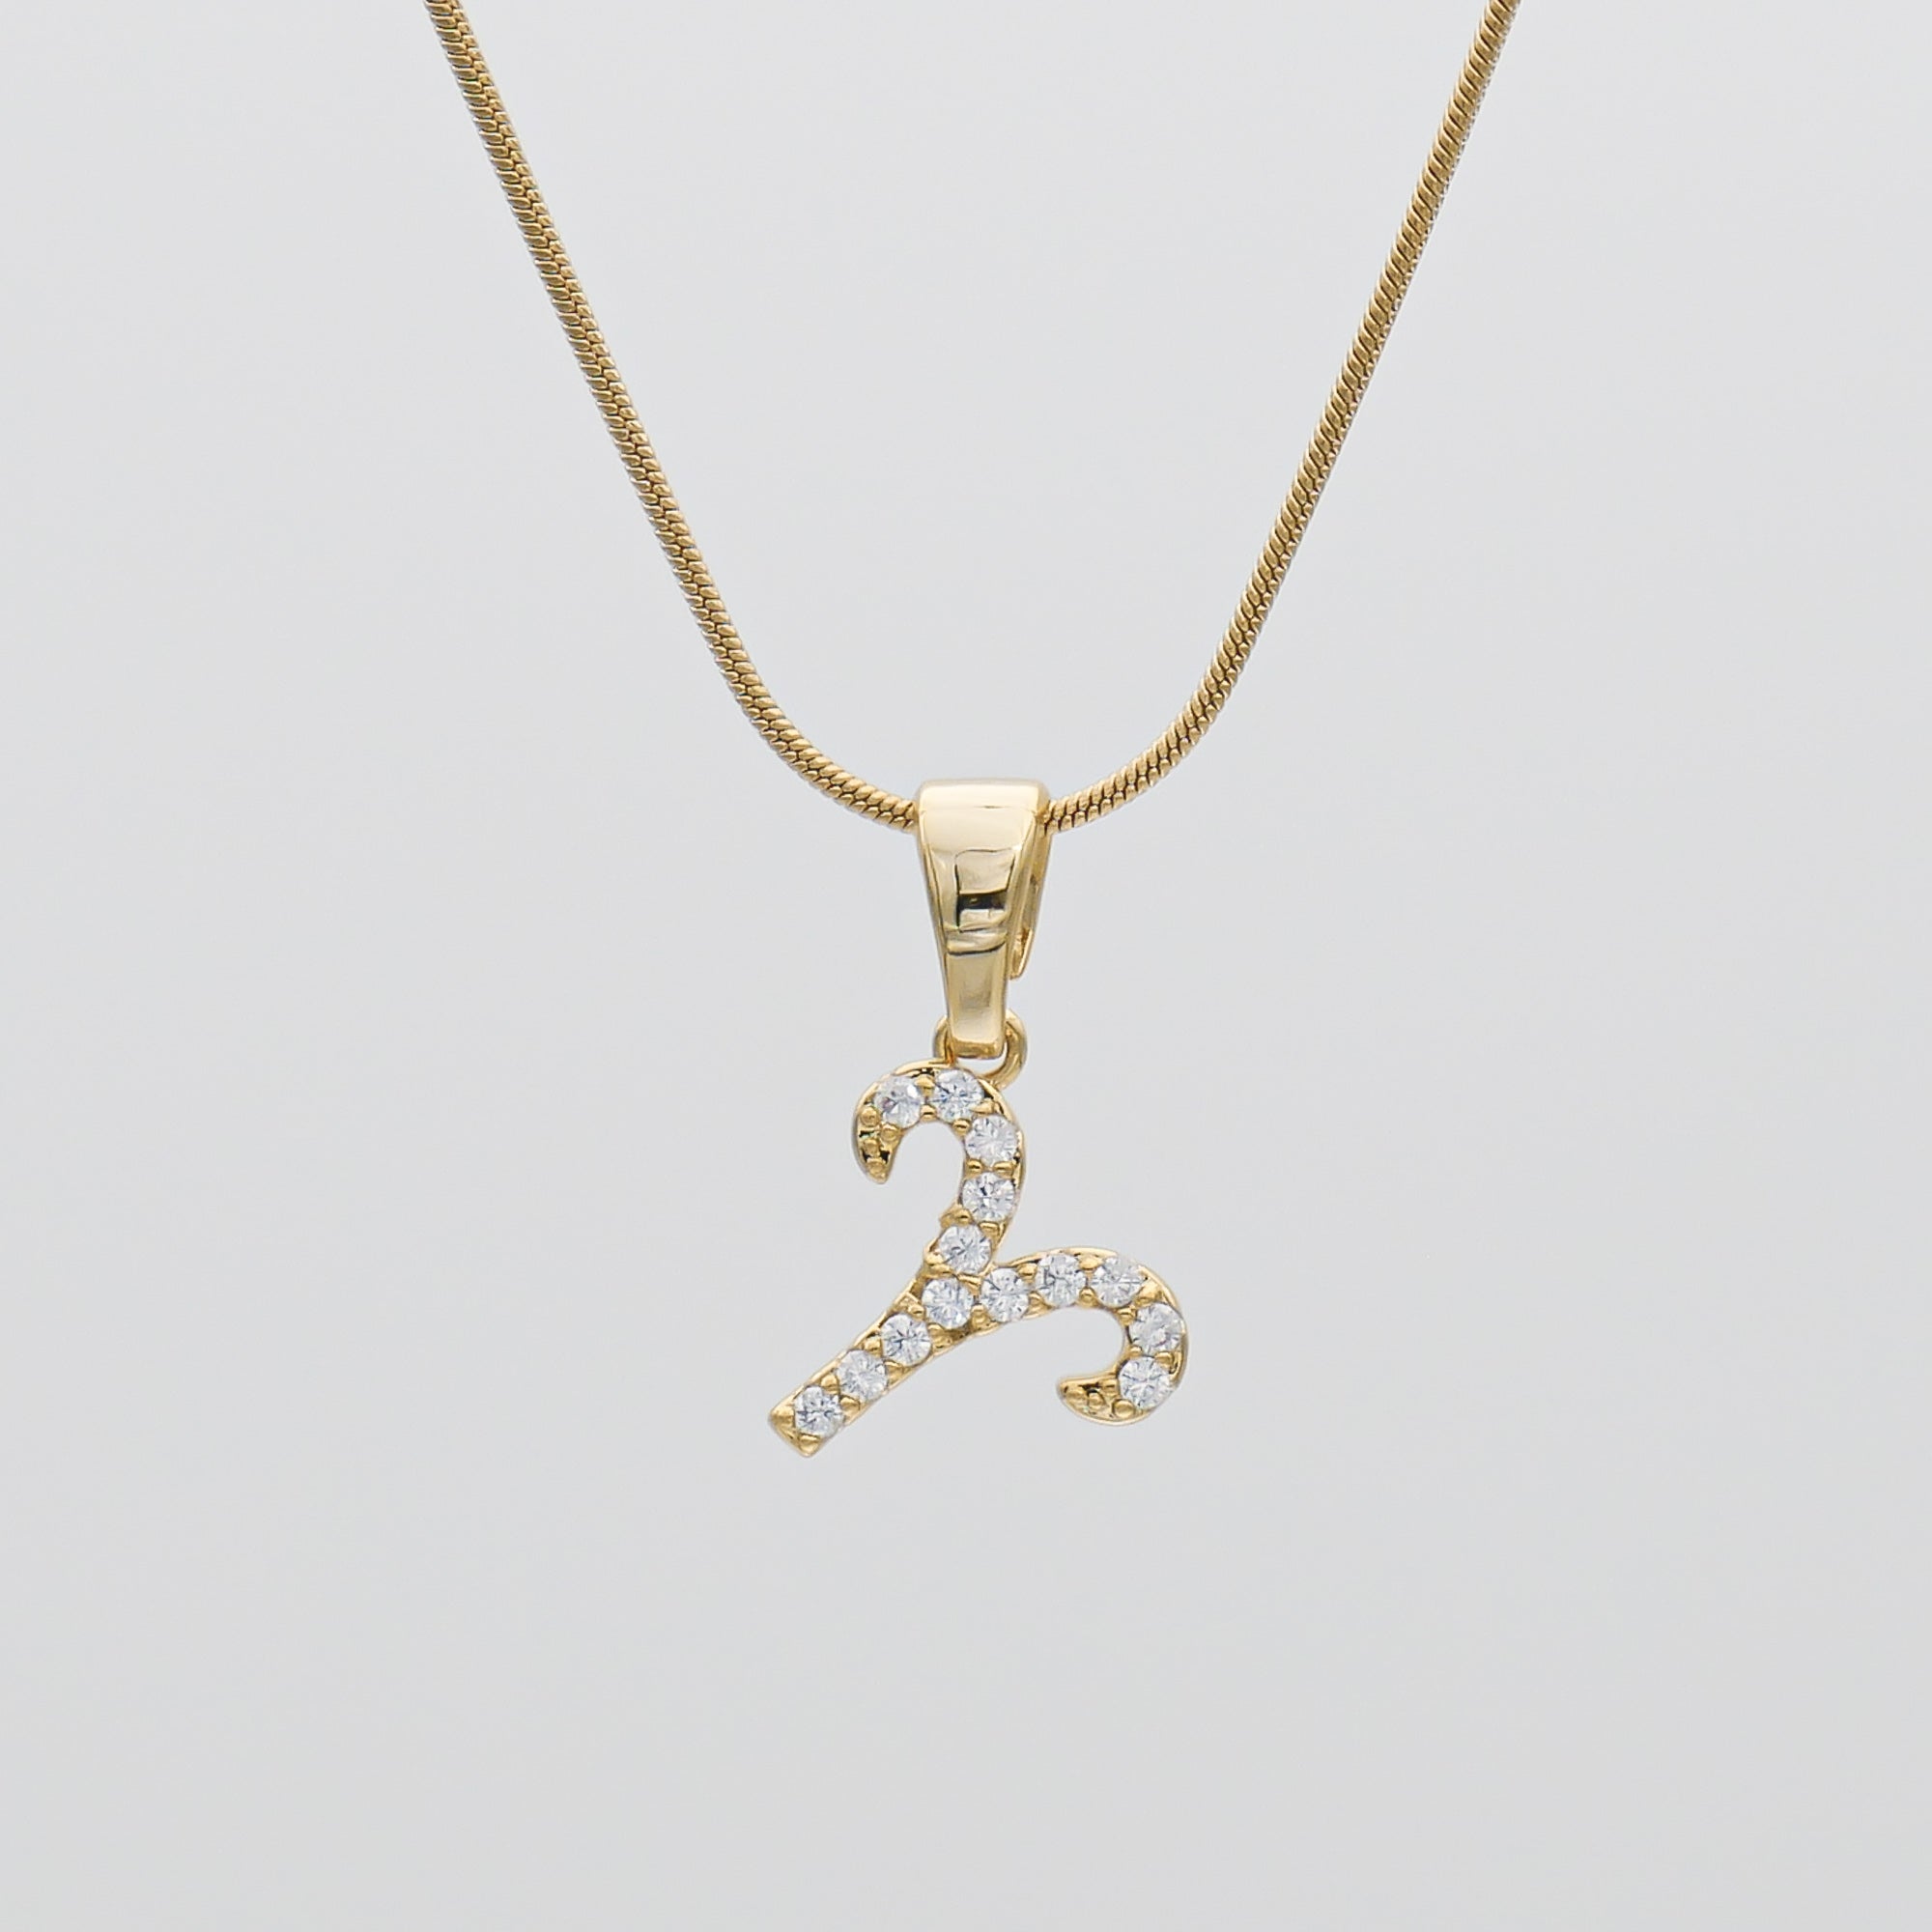 Gold ICY Zodiac Aries Symbol Pendant Necklace by PRYA